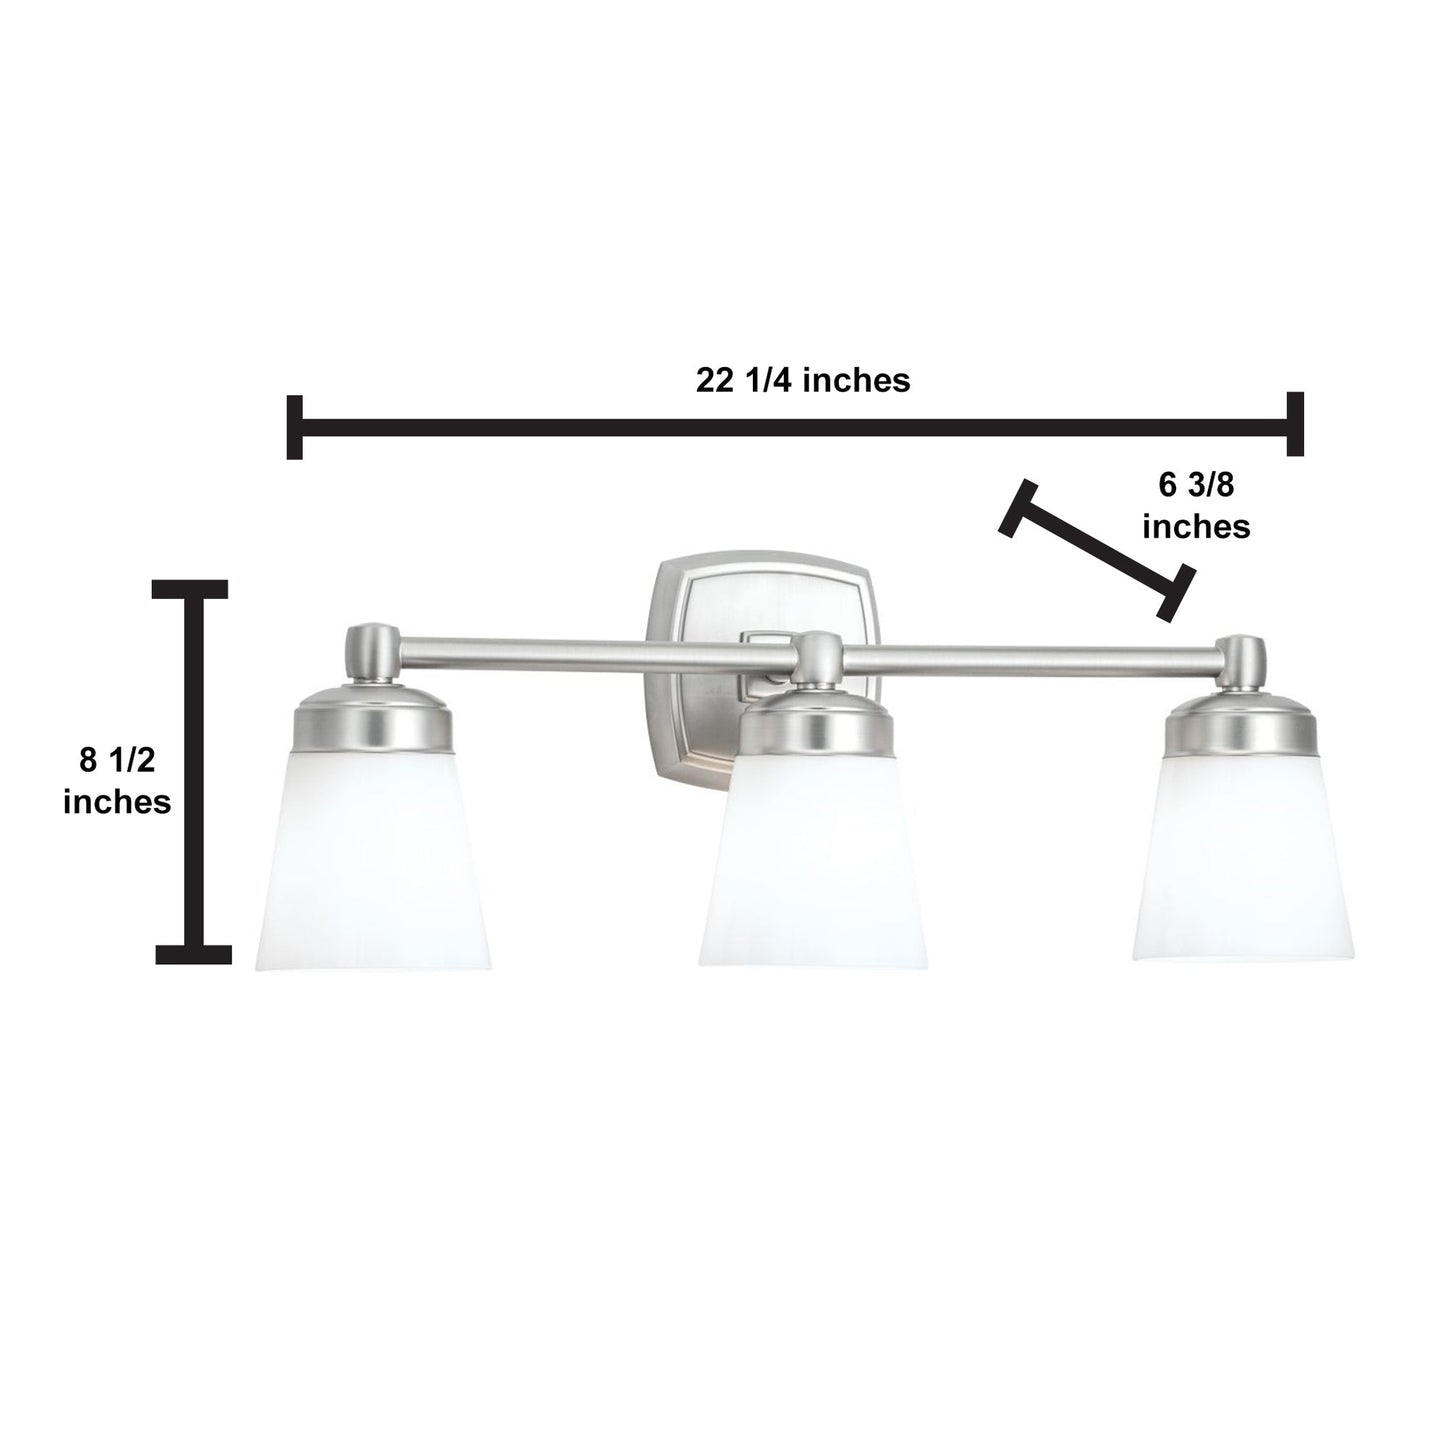 Norwell Lighting Soft Square 9" x 22" 3-Light Sconce Chrome Vanity Light With Shiny Opal Glass Diffuser